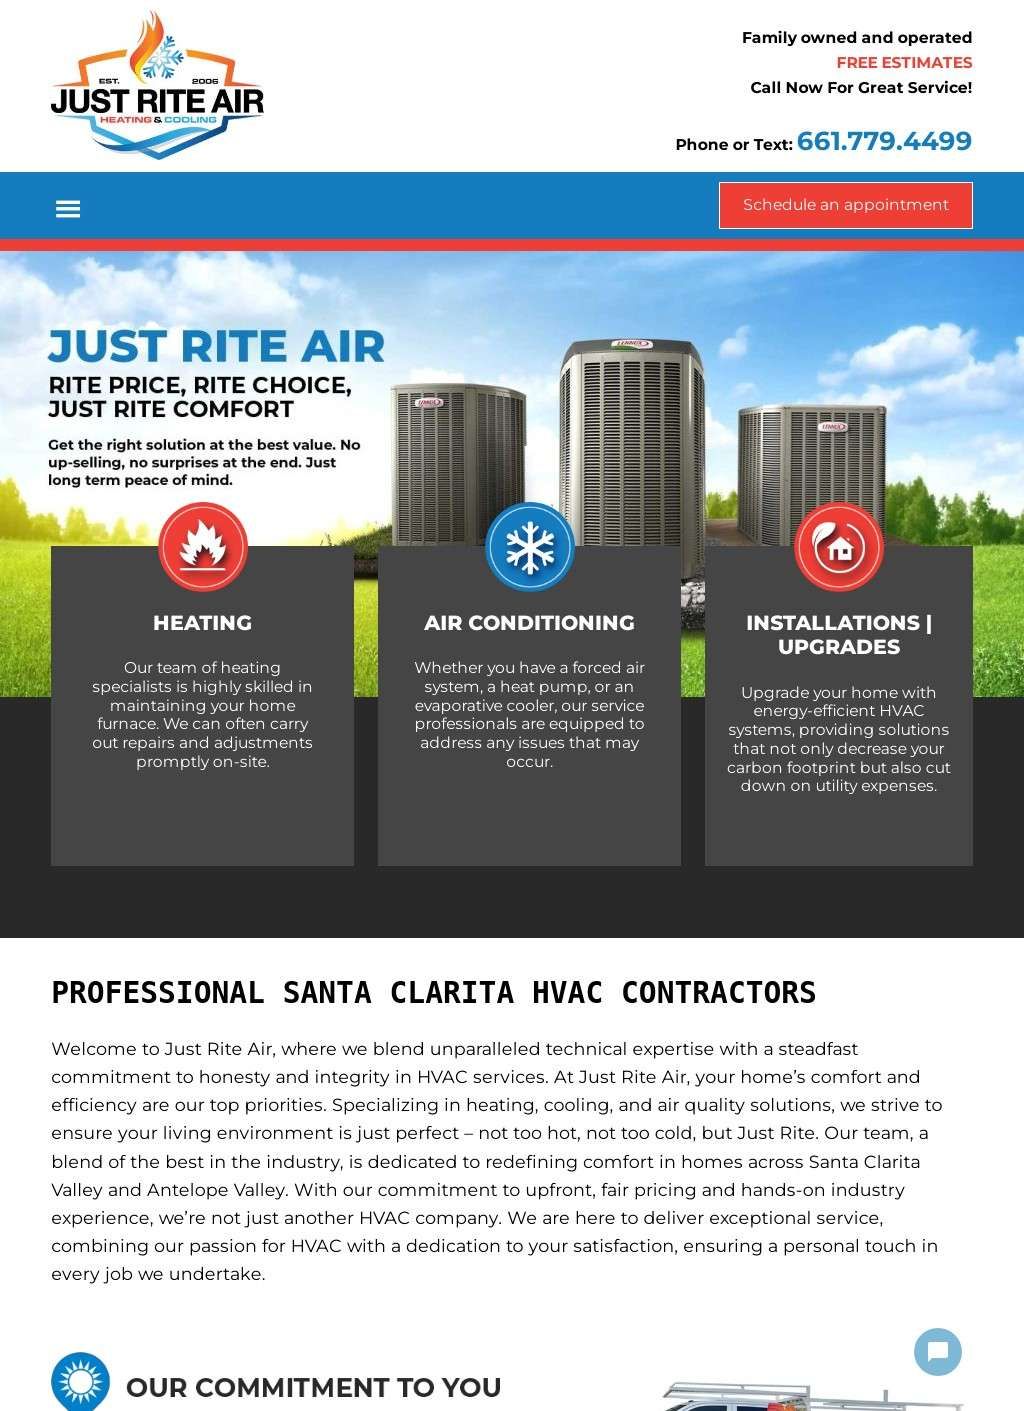 Just Rite Air Conditioning & Heating